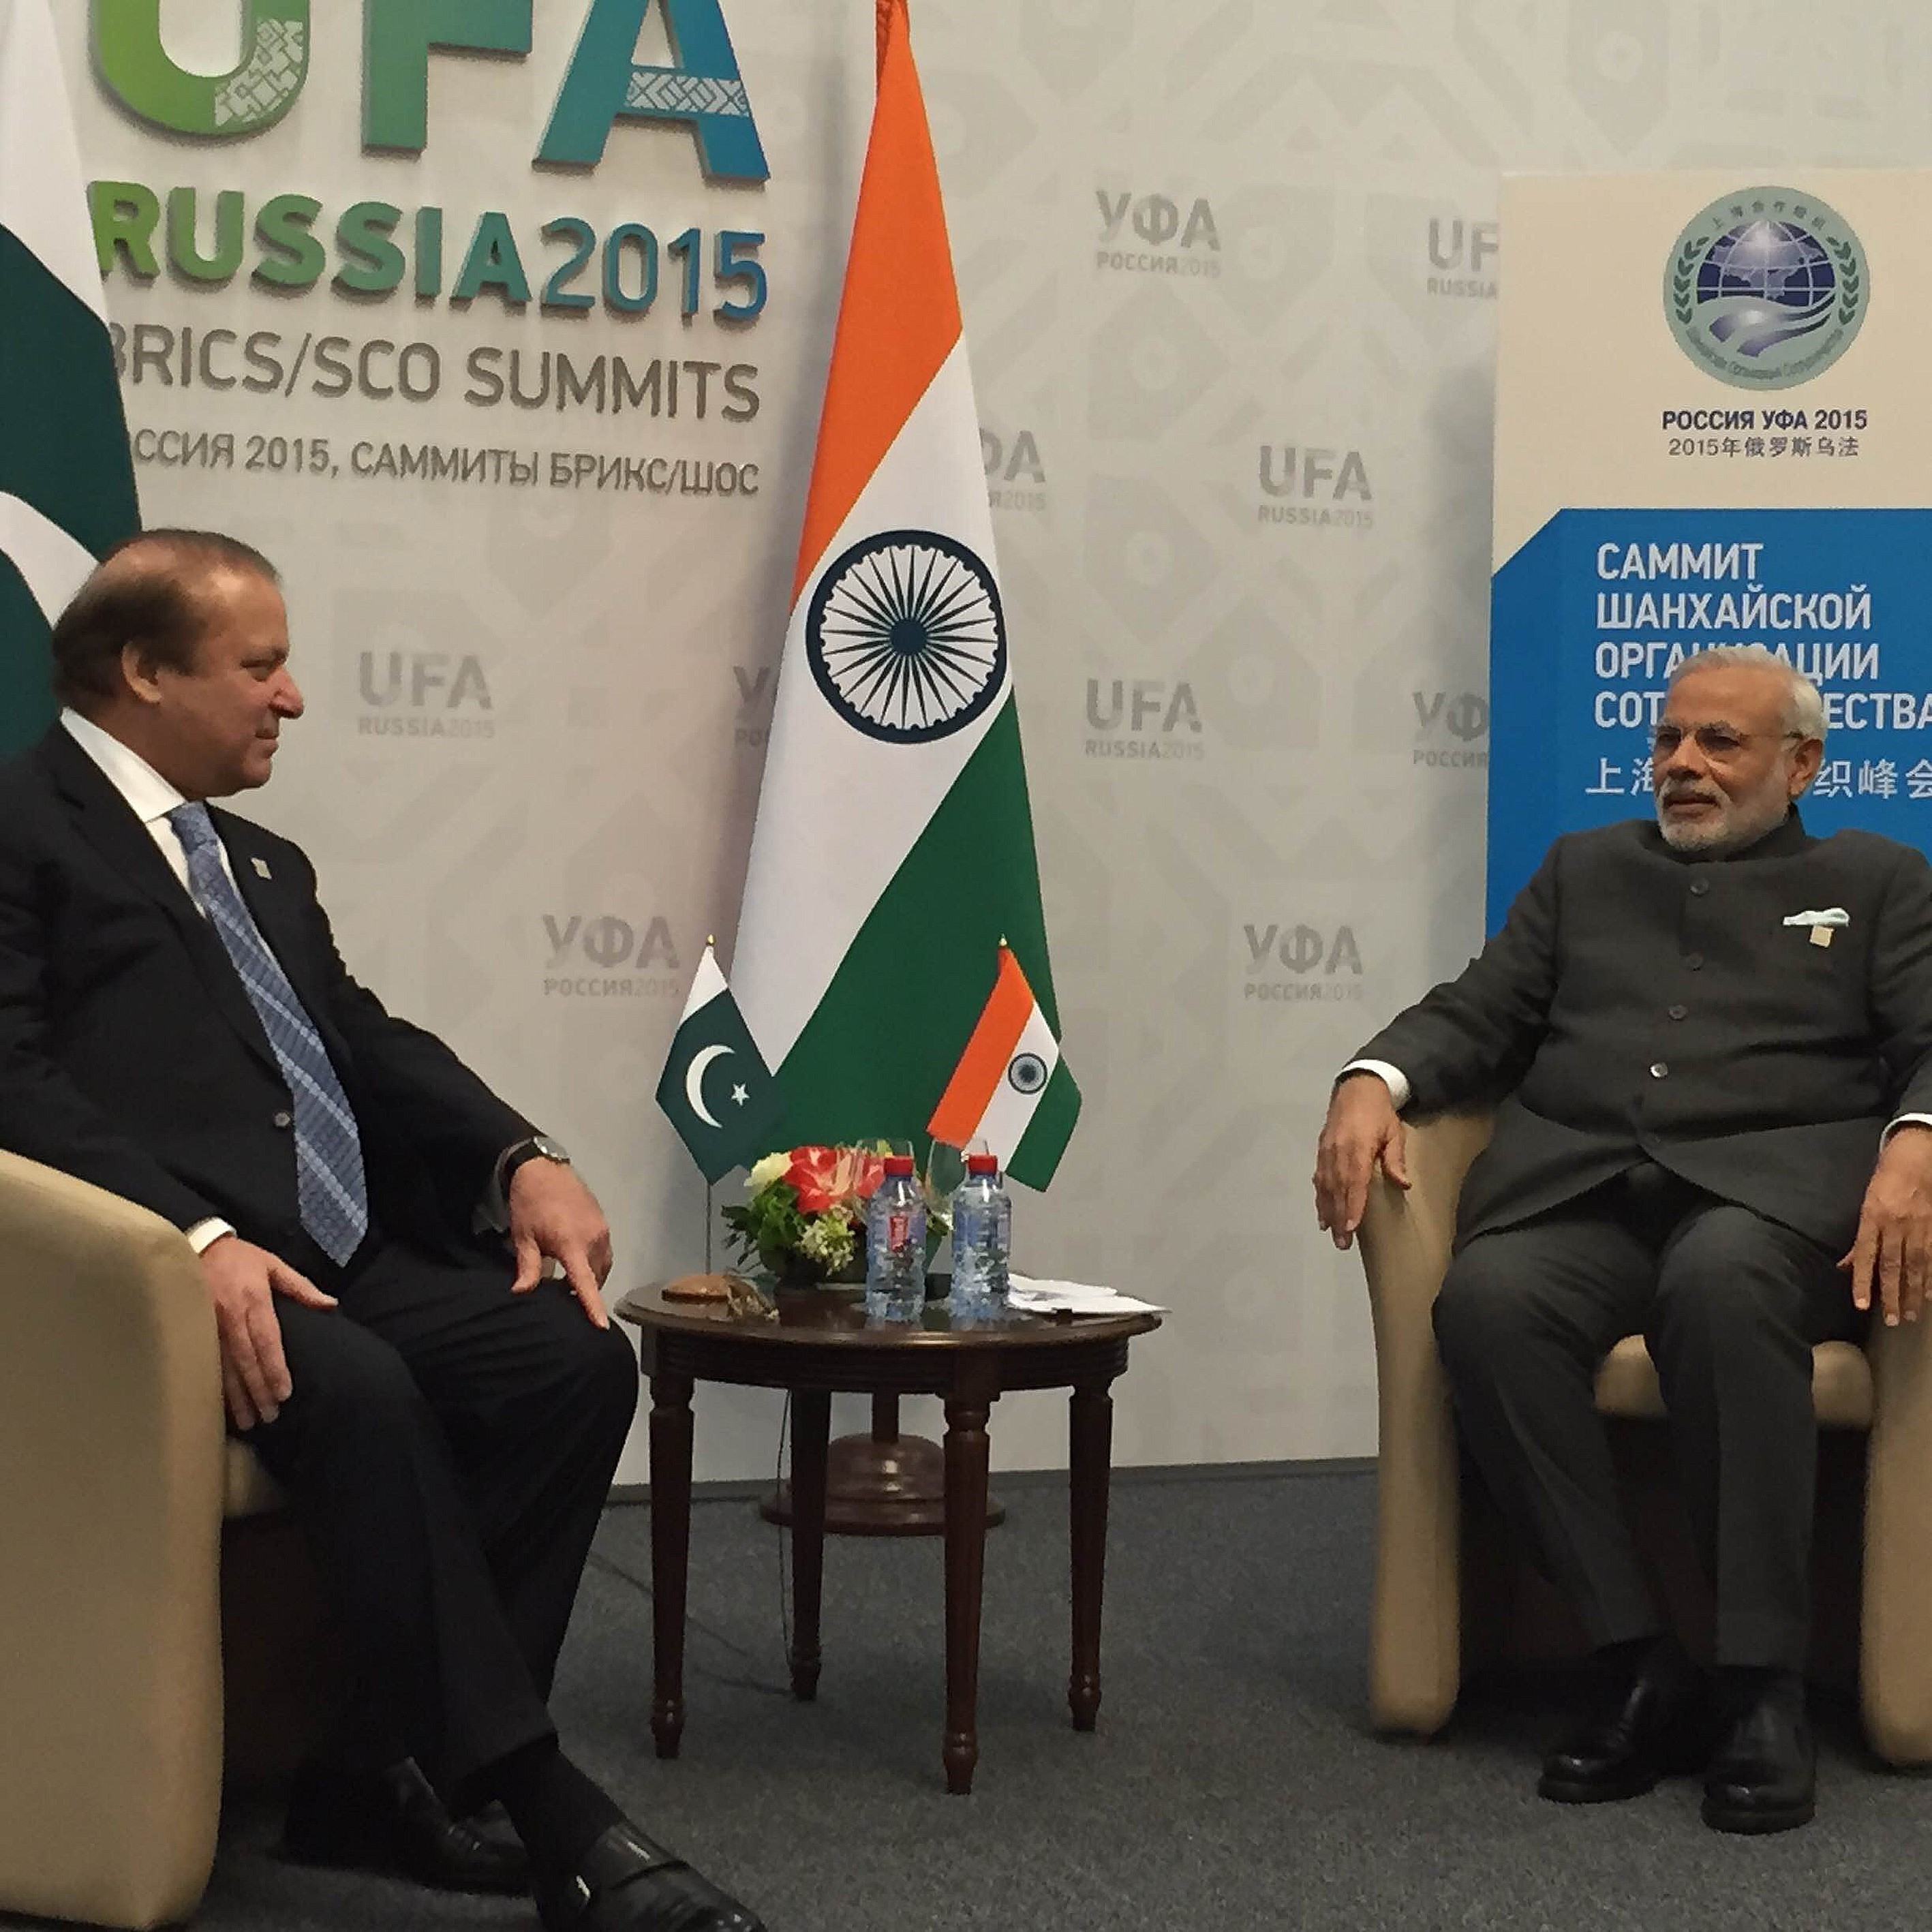 Pakistani Prime Minister Muhammad Nawaz Sharif (L) and India's Prime Minister Narendra Modi (R) meet during Shanghai Cooperation Organization (SCO) summit in Ufa on July 10, 2015. (Anadolu Agency—Getty Images)